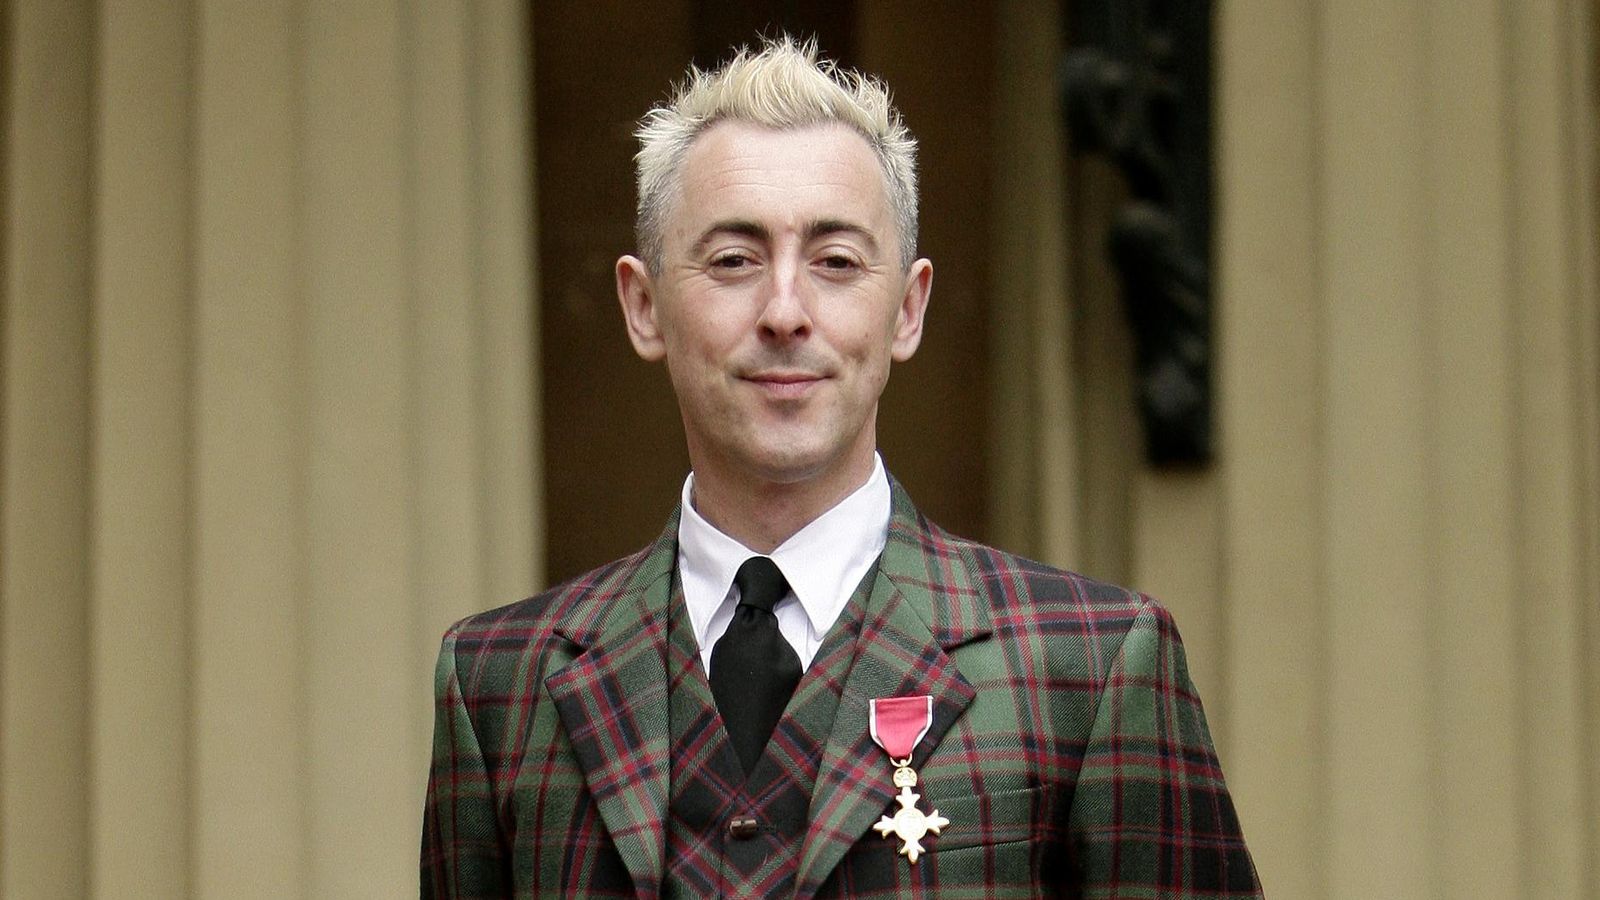 Alan Cumming gives back OBE over links to 'toxic' British Empire